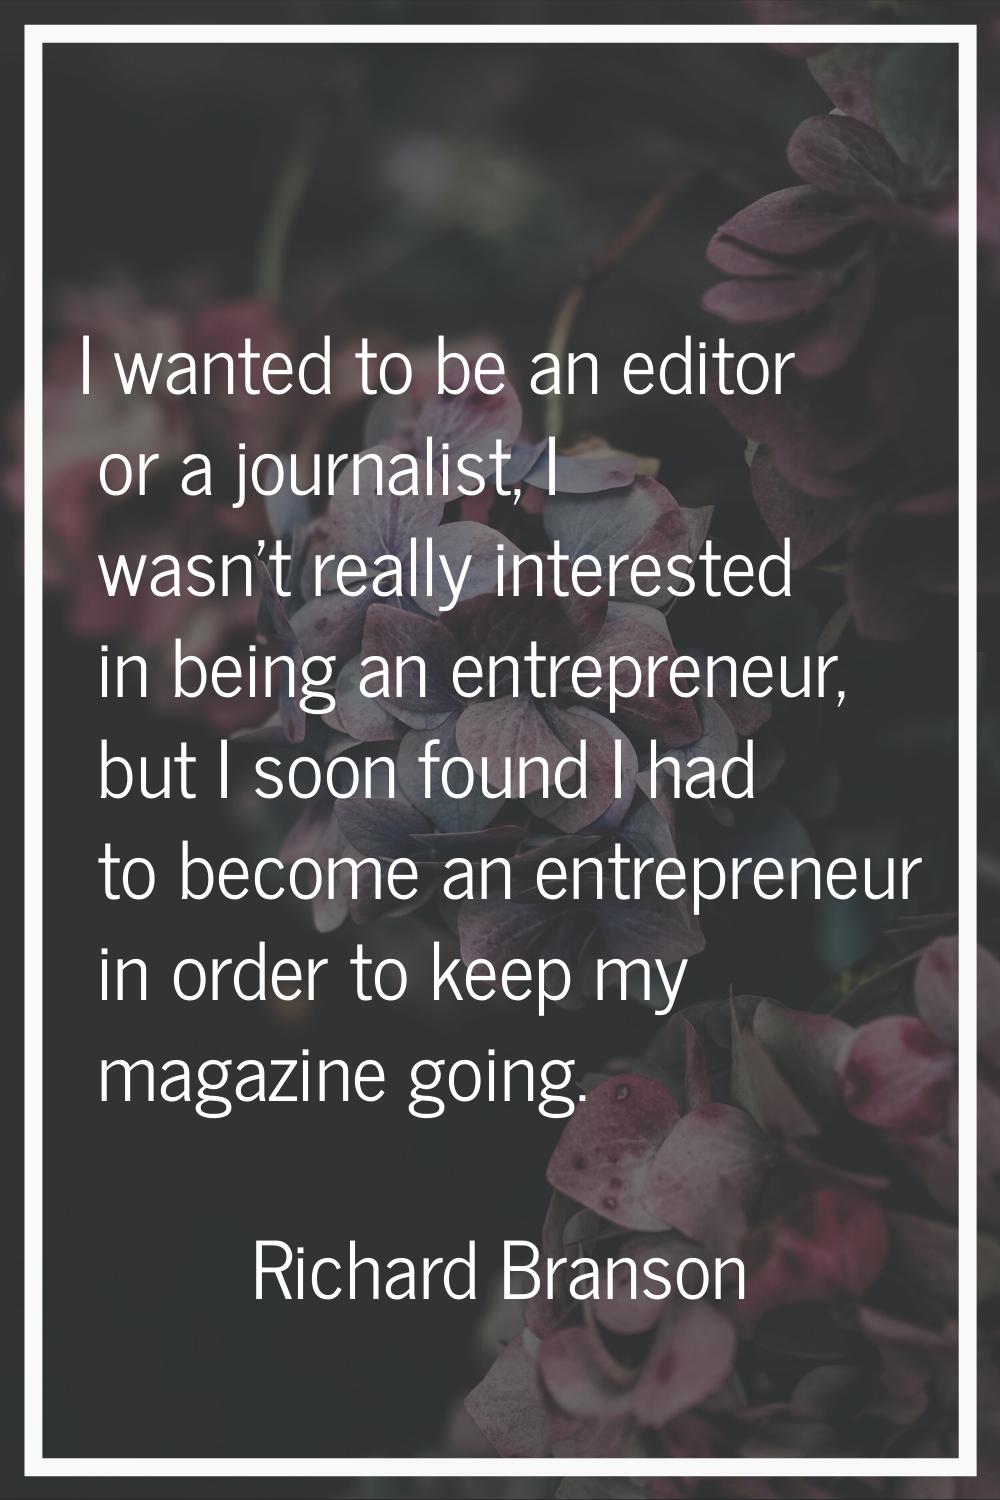 I wanted to be an editor or a journalist, I wasn't really interested in being an entrepreneur, but 